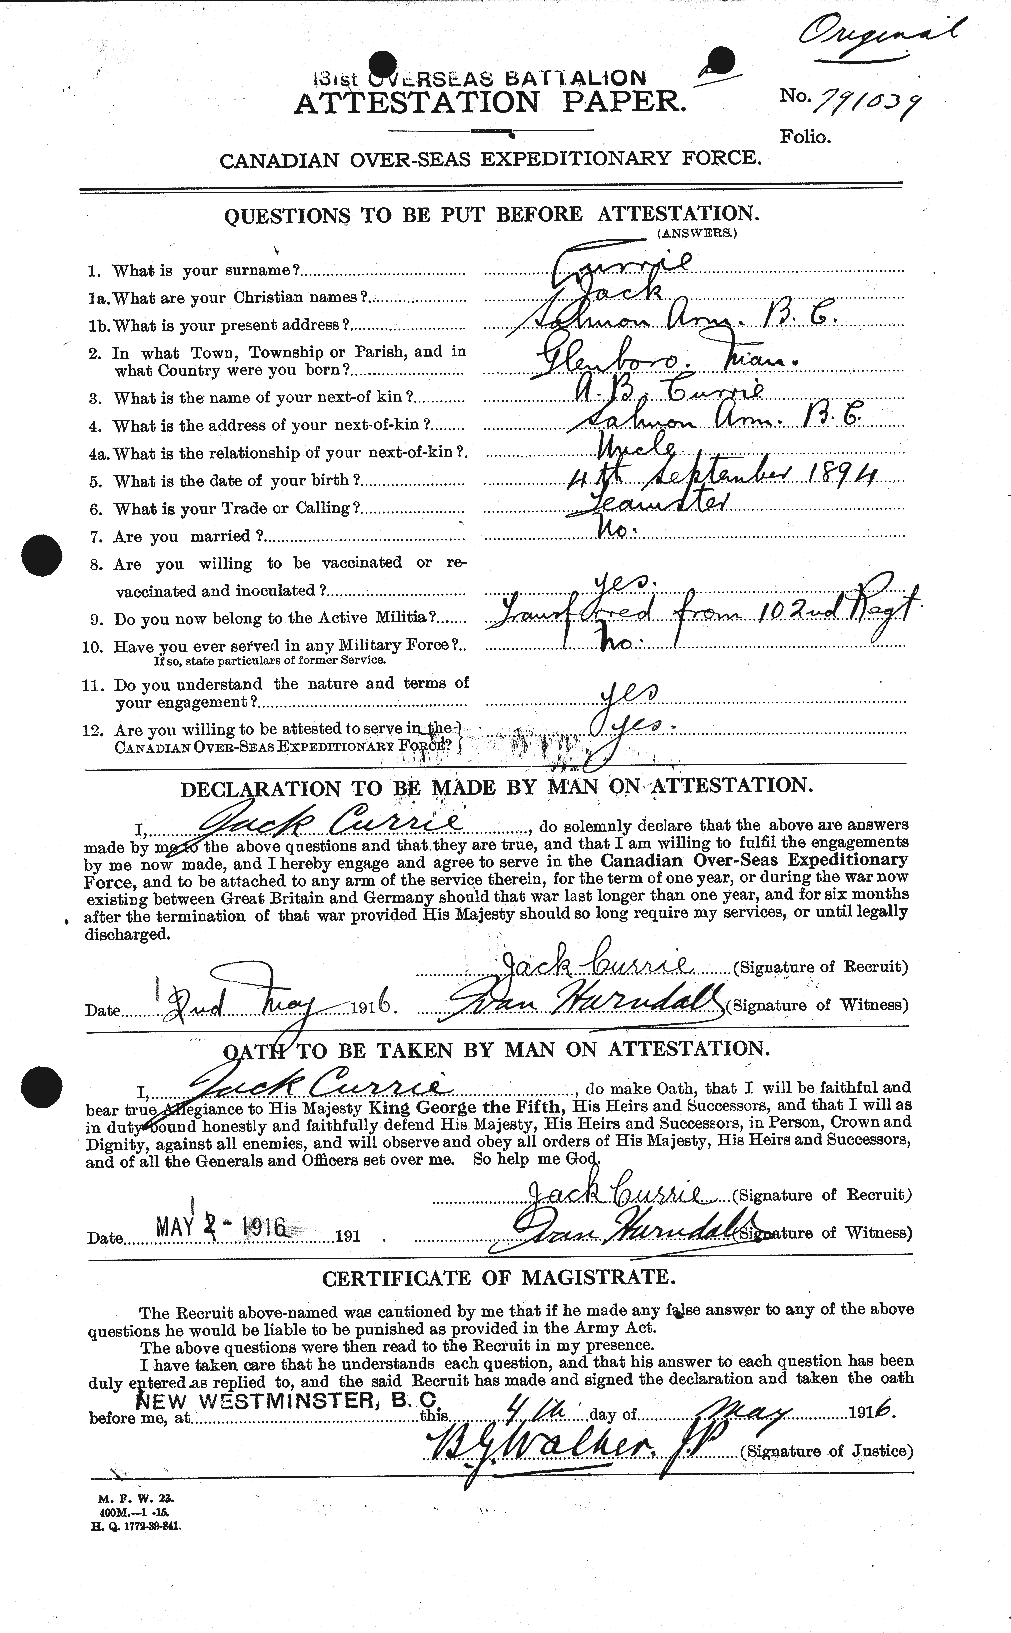 Personnel Records of the First World War - CEF 072298a